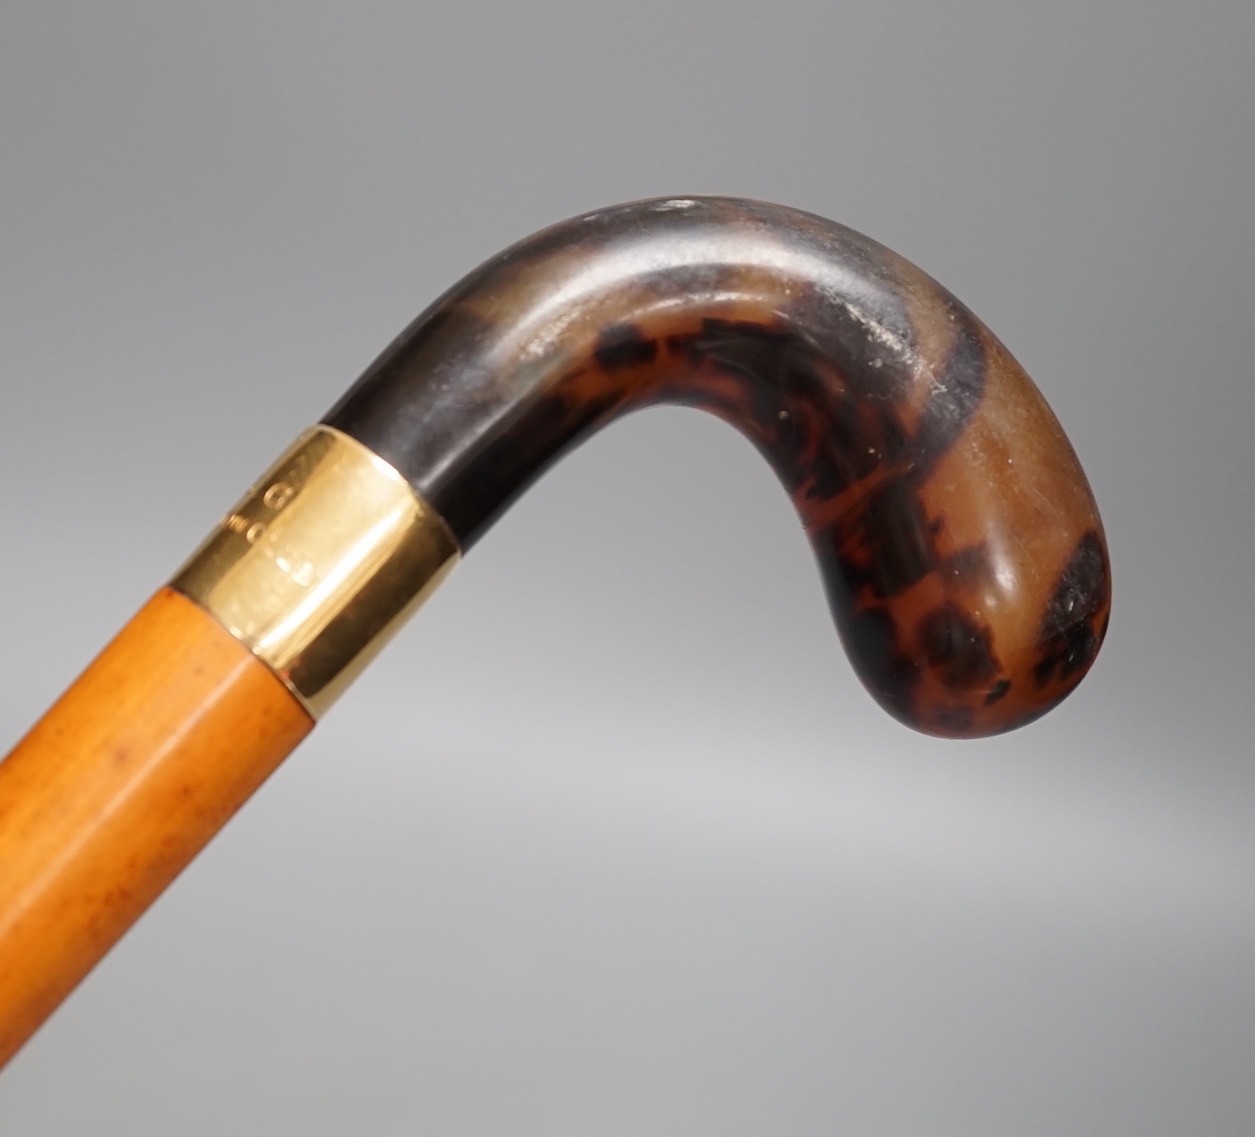 An 18ct gold collared malacca cane, with a horn handled handle, stained as tortoiseshell, 94 cms long